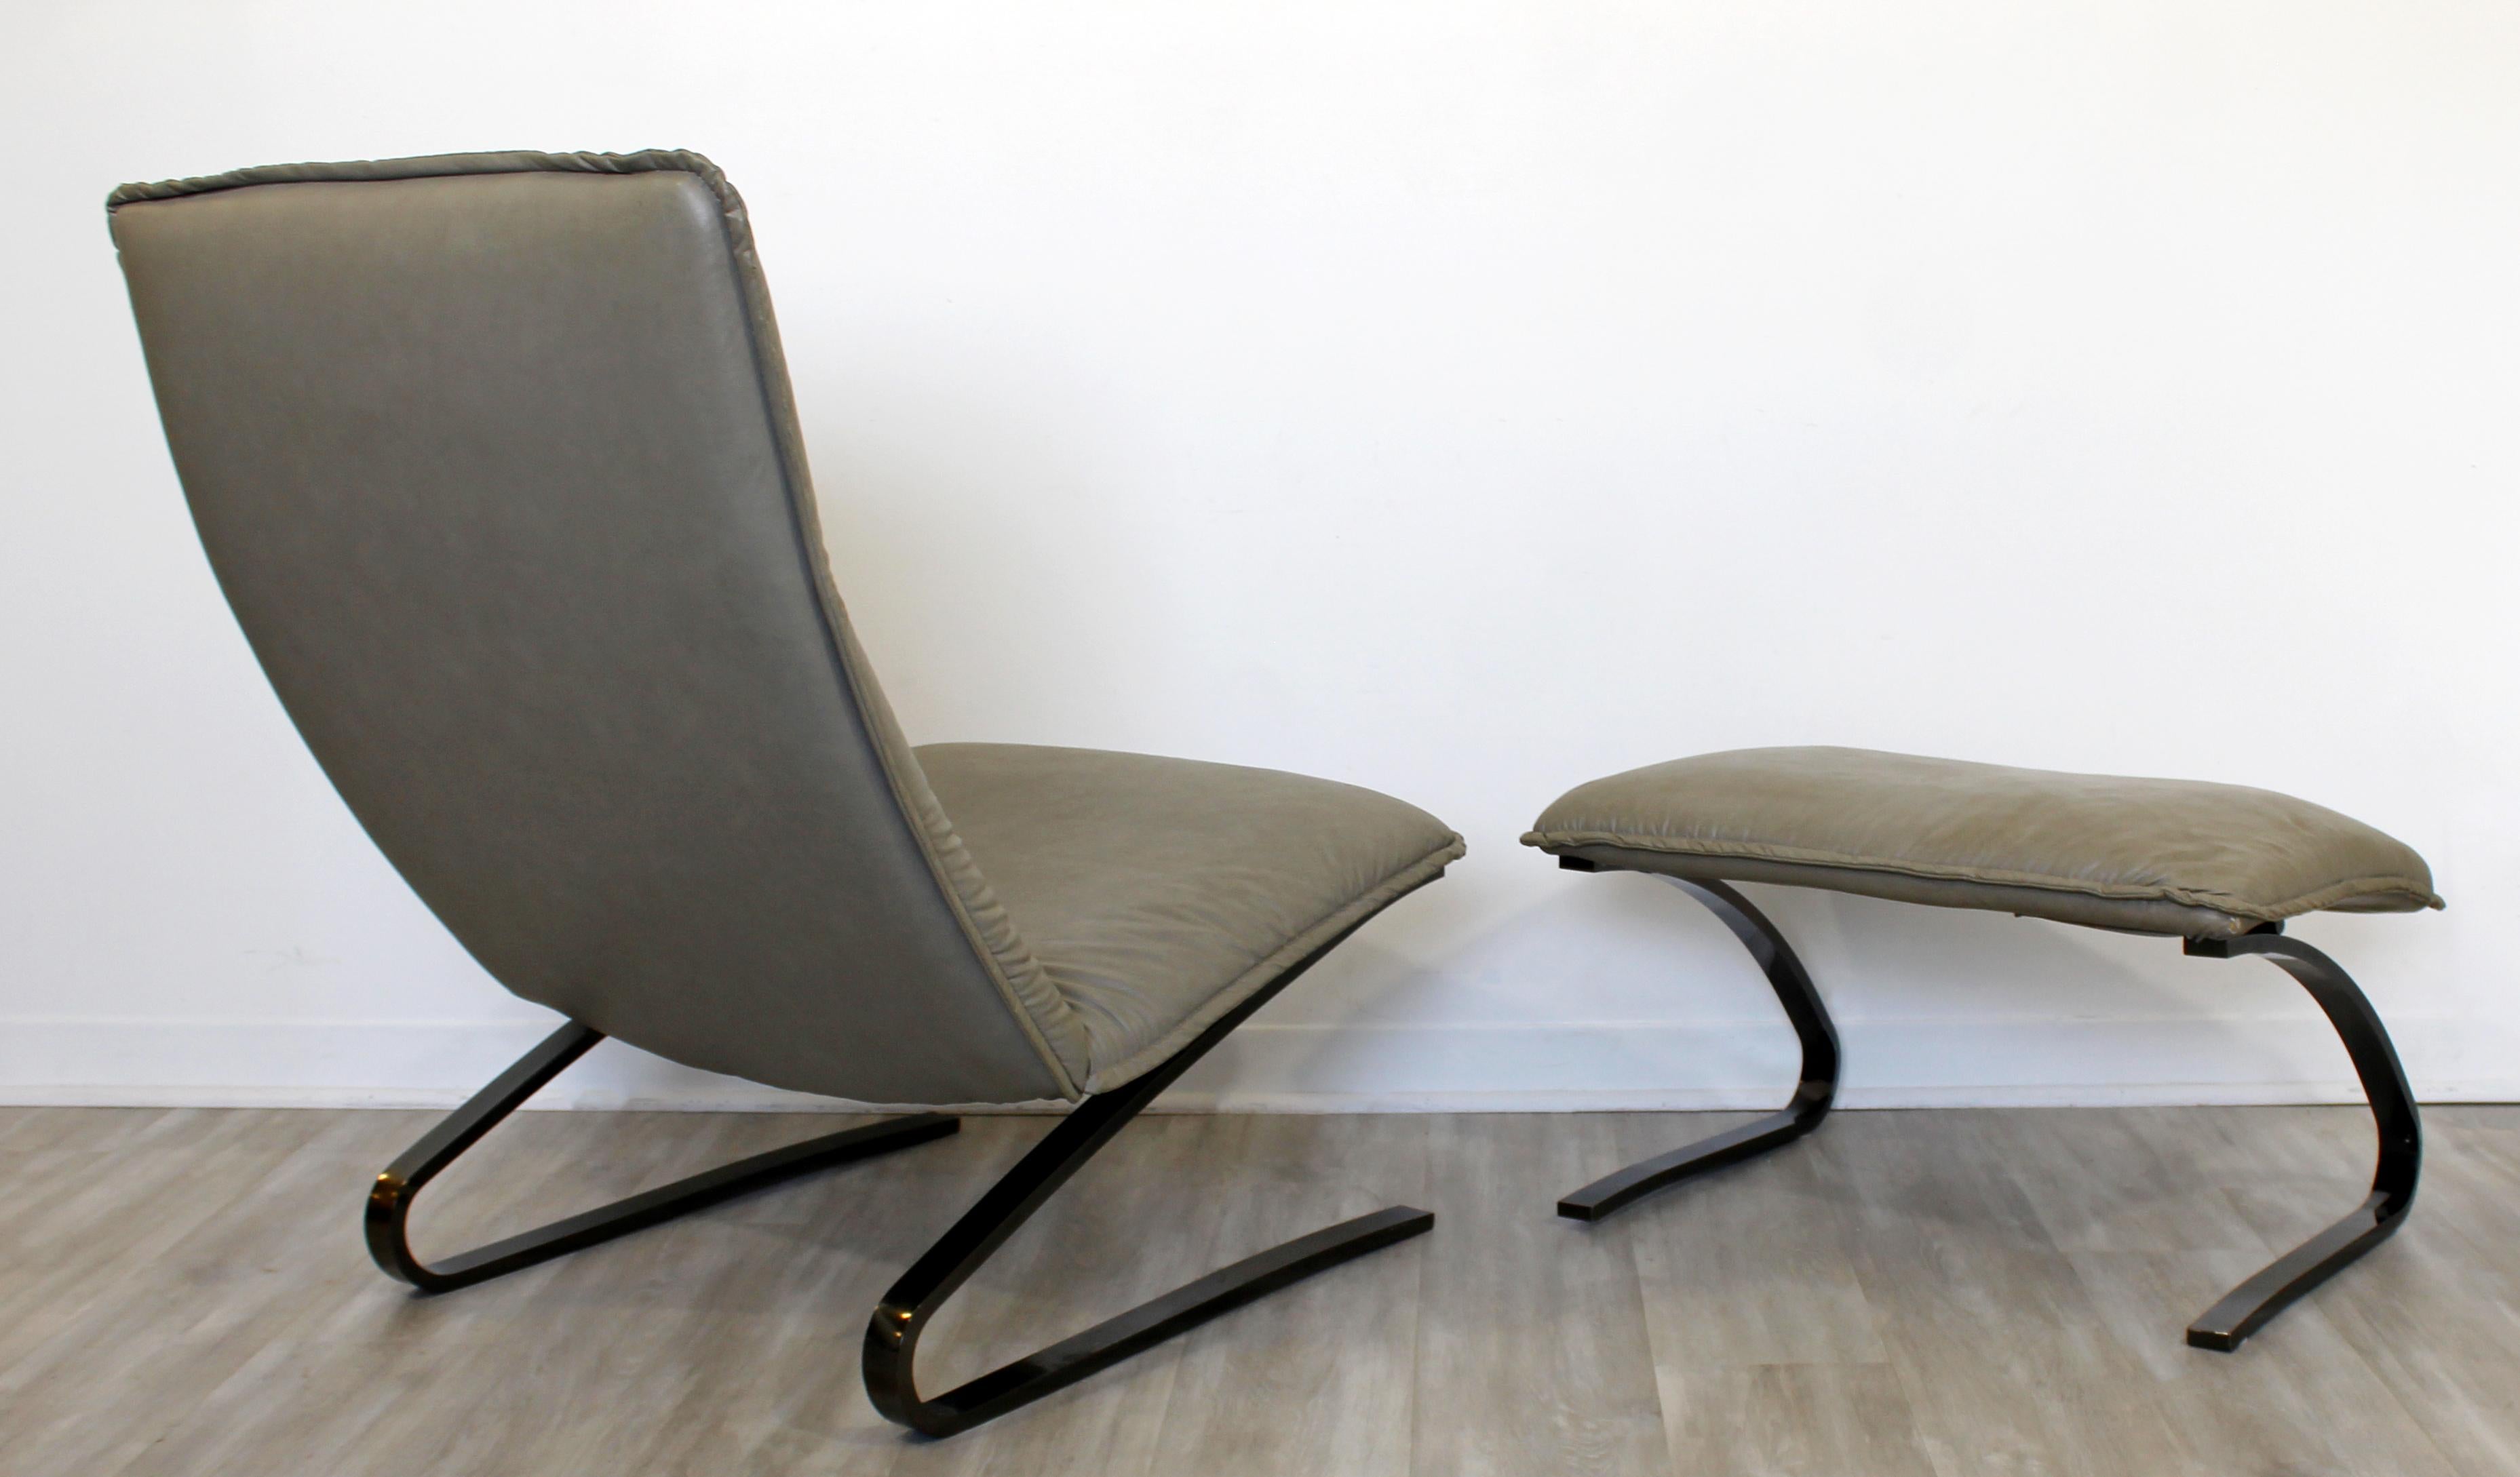 Late 20th Century Contemporary Modern Sculptural DIA Gunmetal Leather Lounge Chair & Ottoman 1990s